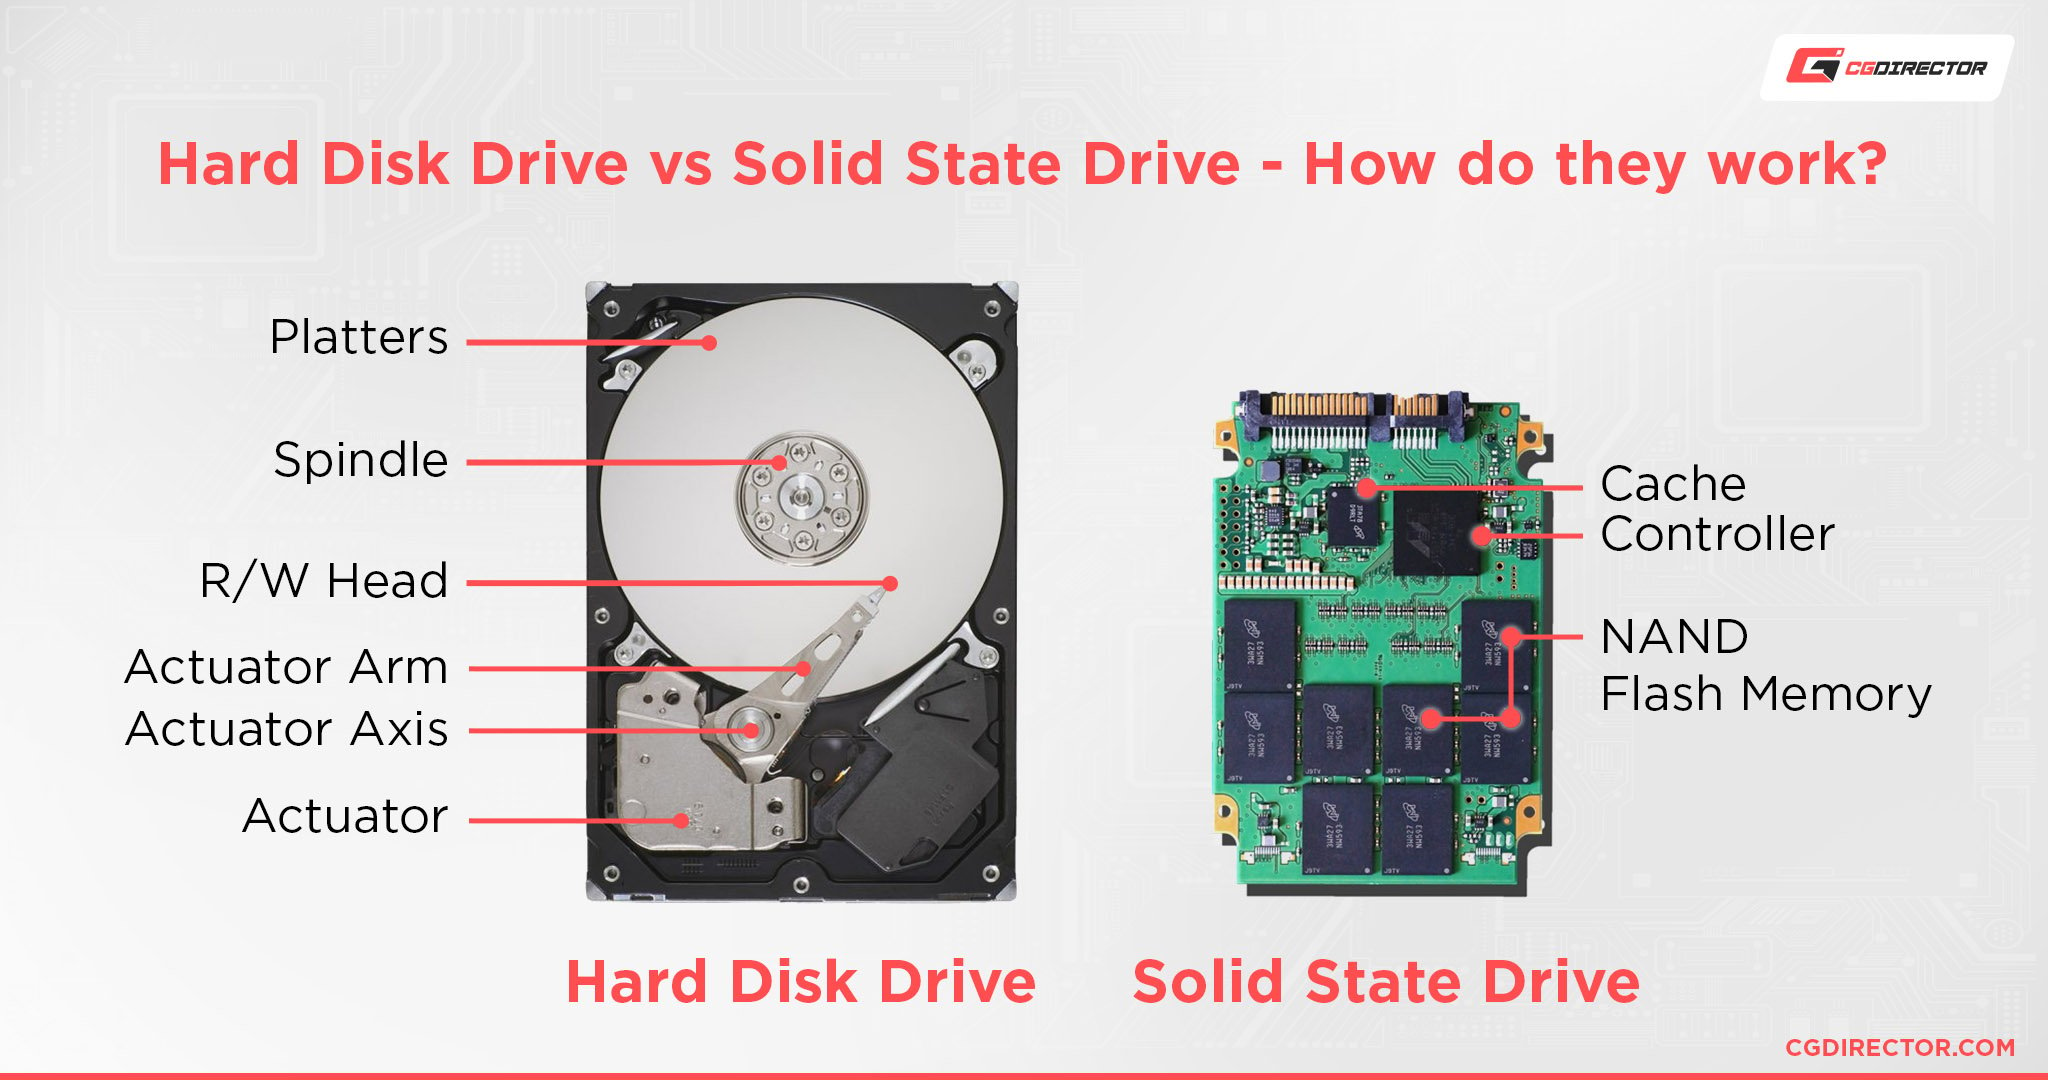 Hard Disk Drive vs Solid State Drive - How do they work